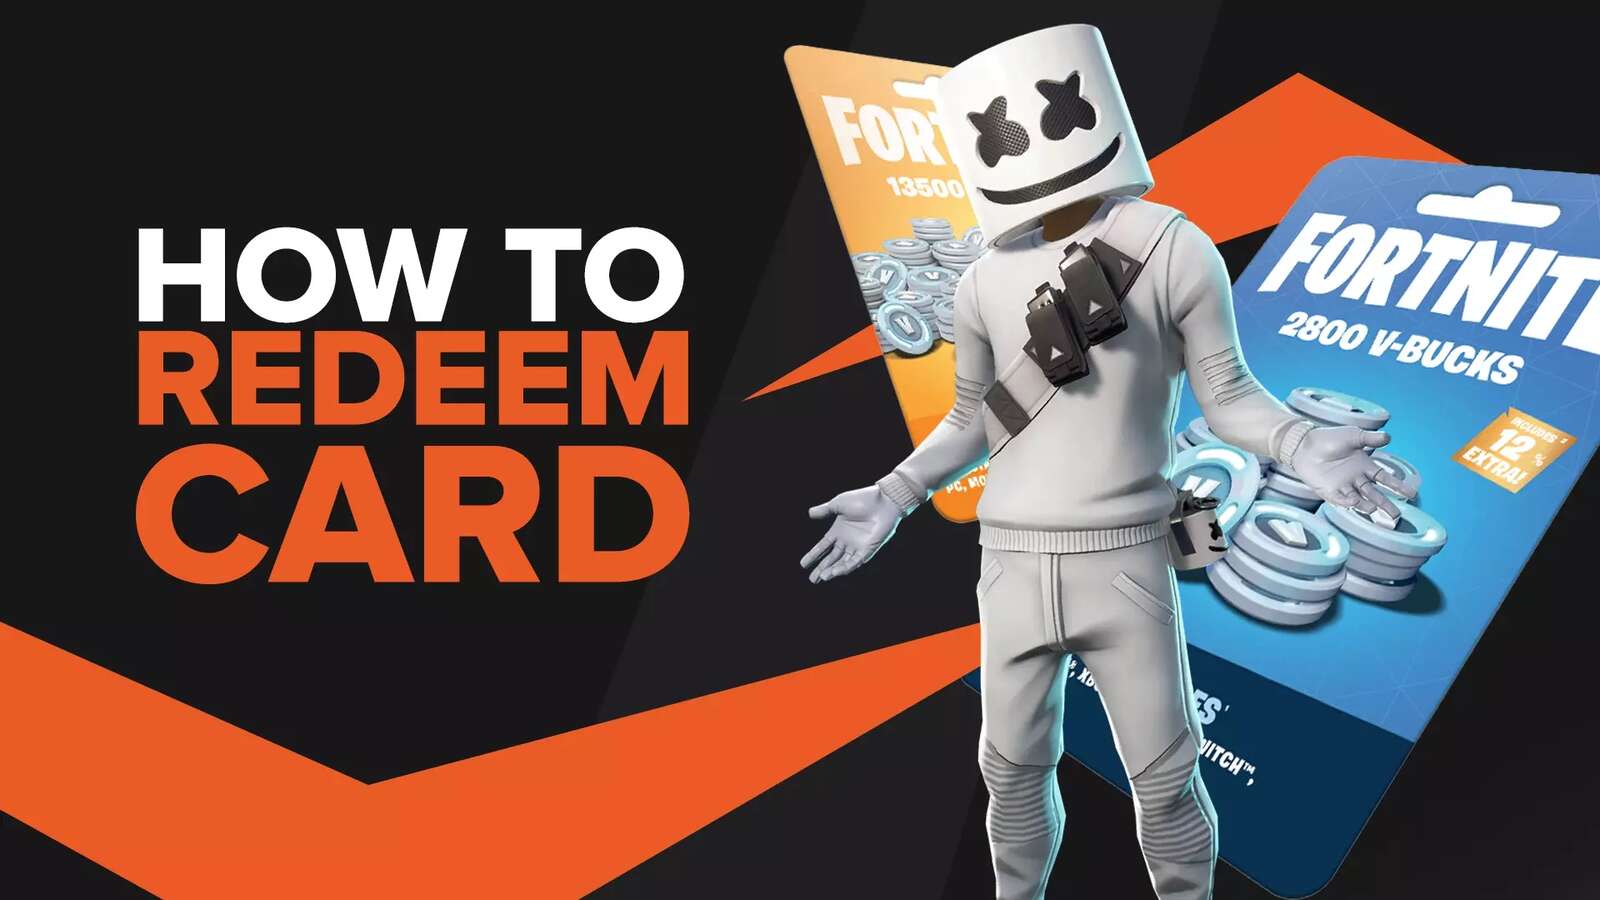 How To Quickly Redeem Fortnite Gift Cards [PC & Console]